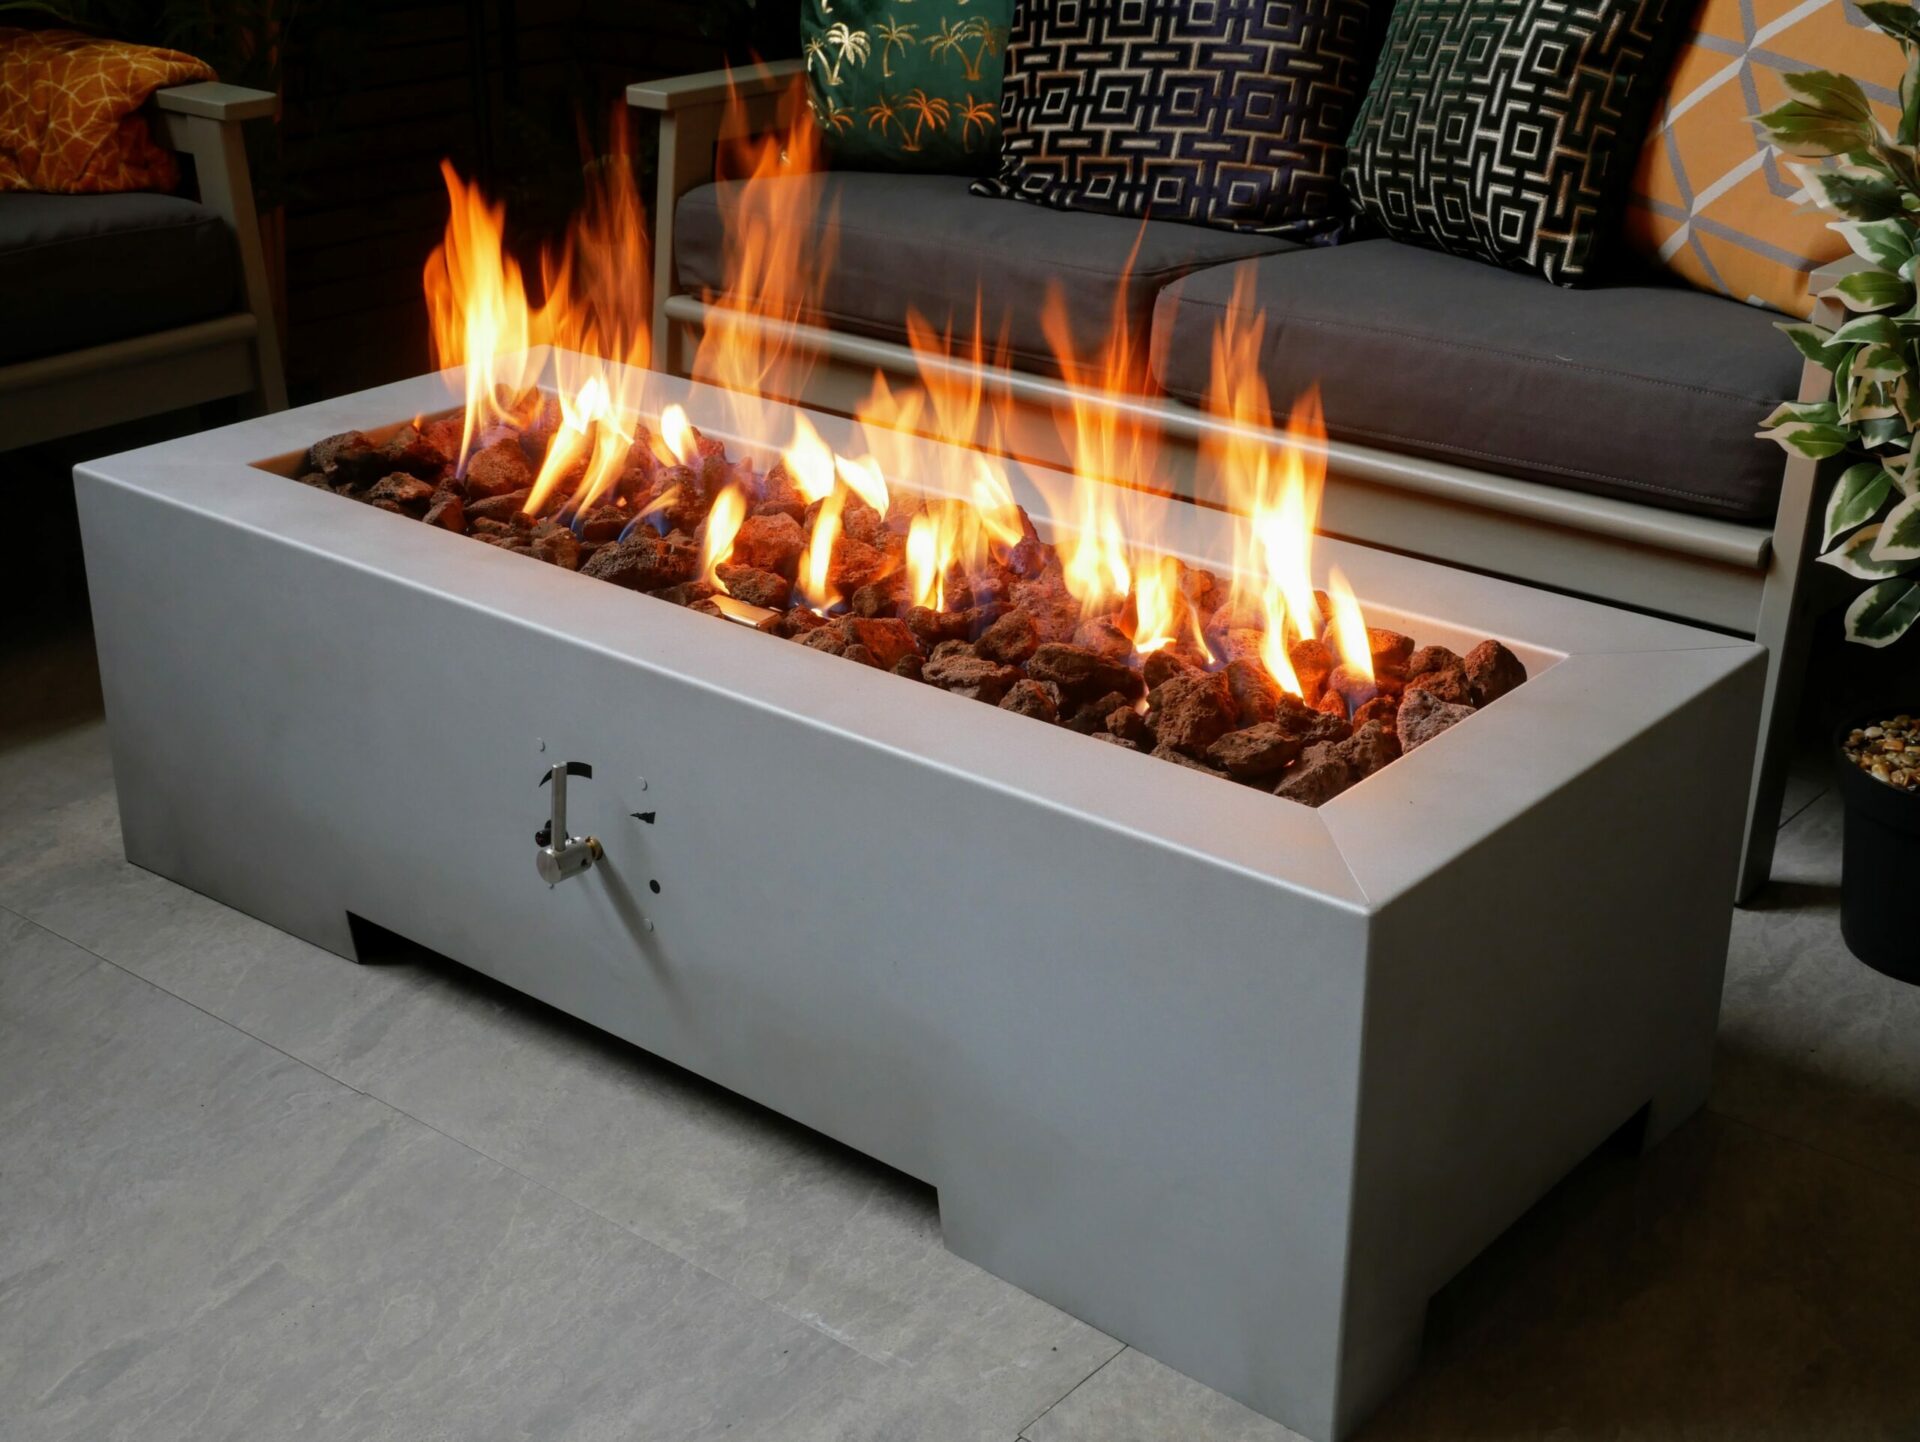 How To Turn On A Gas Fire Pit